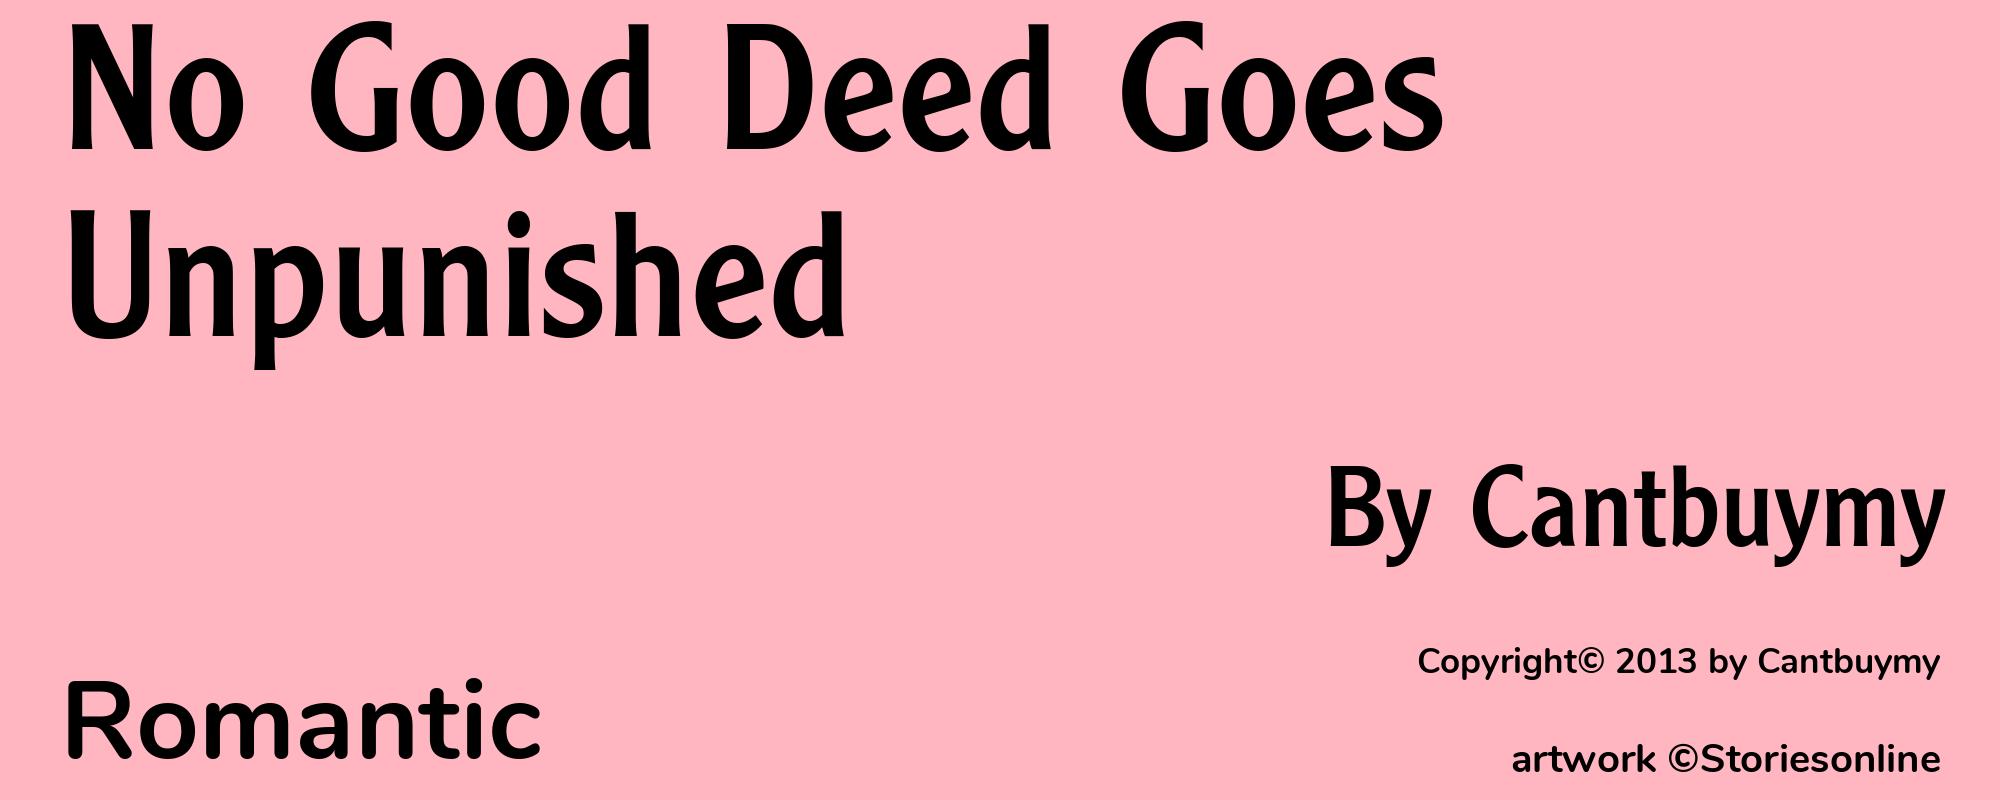 No Good Deed Goes Unpunished - Cover